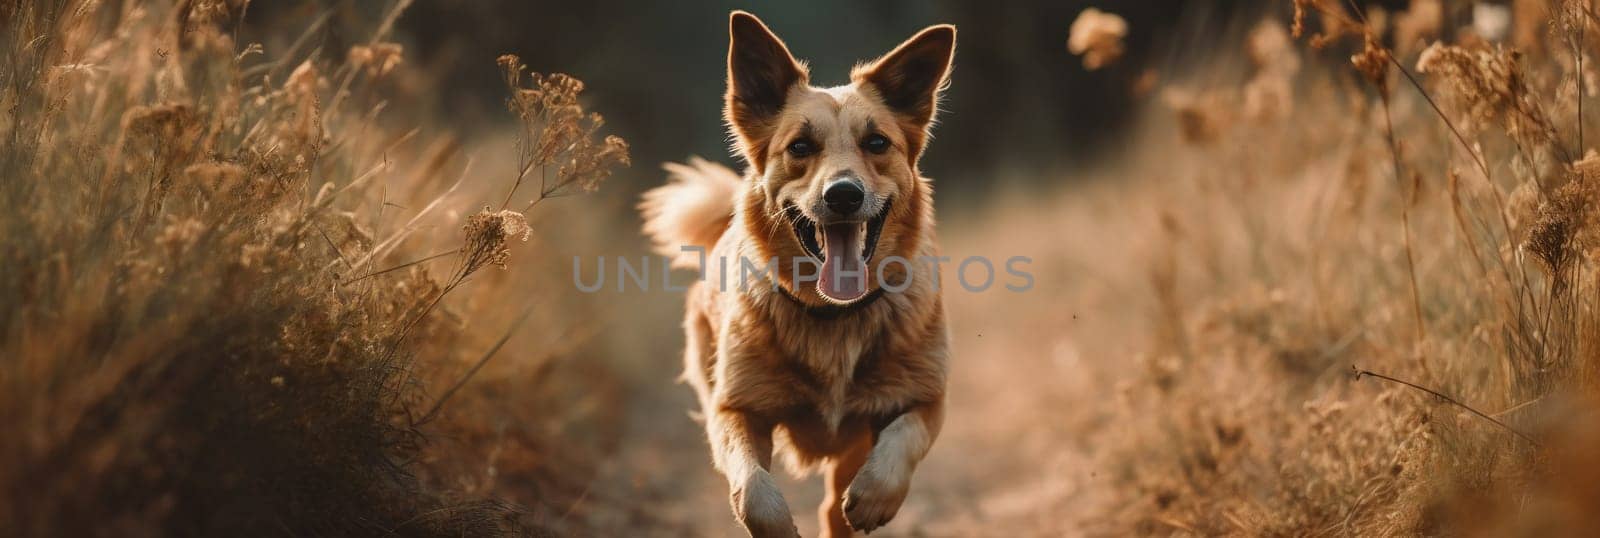 cute funny dog running in meadow looking in camera. banner.